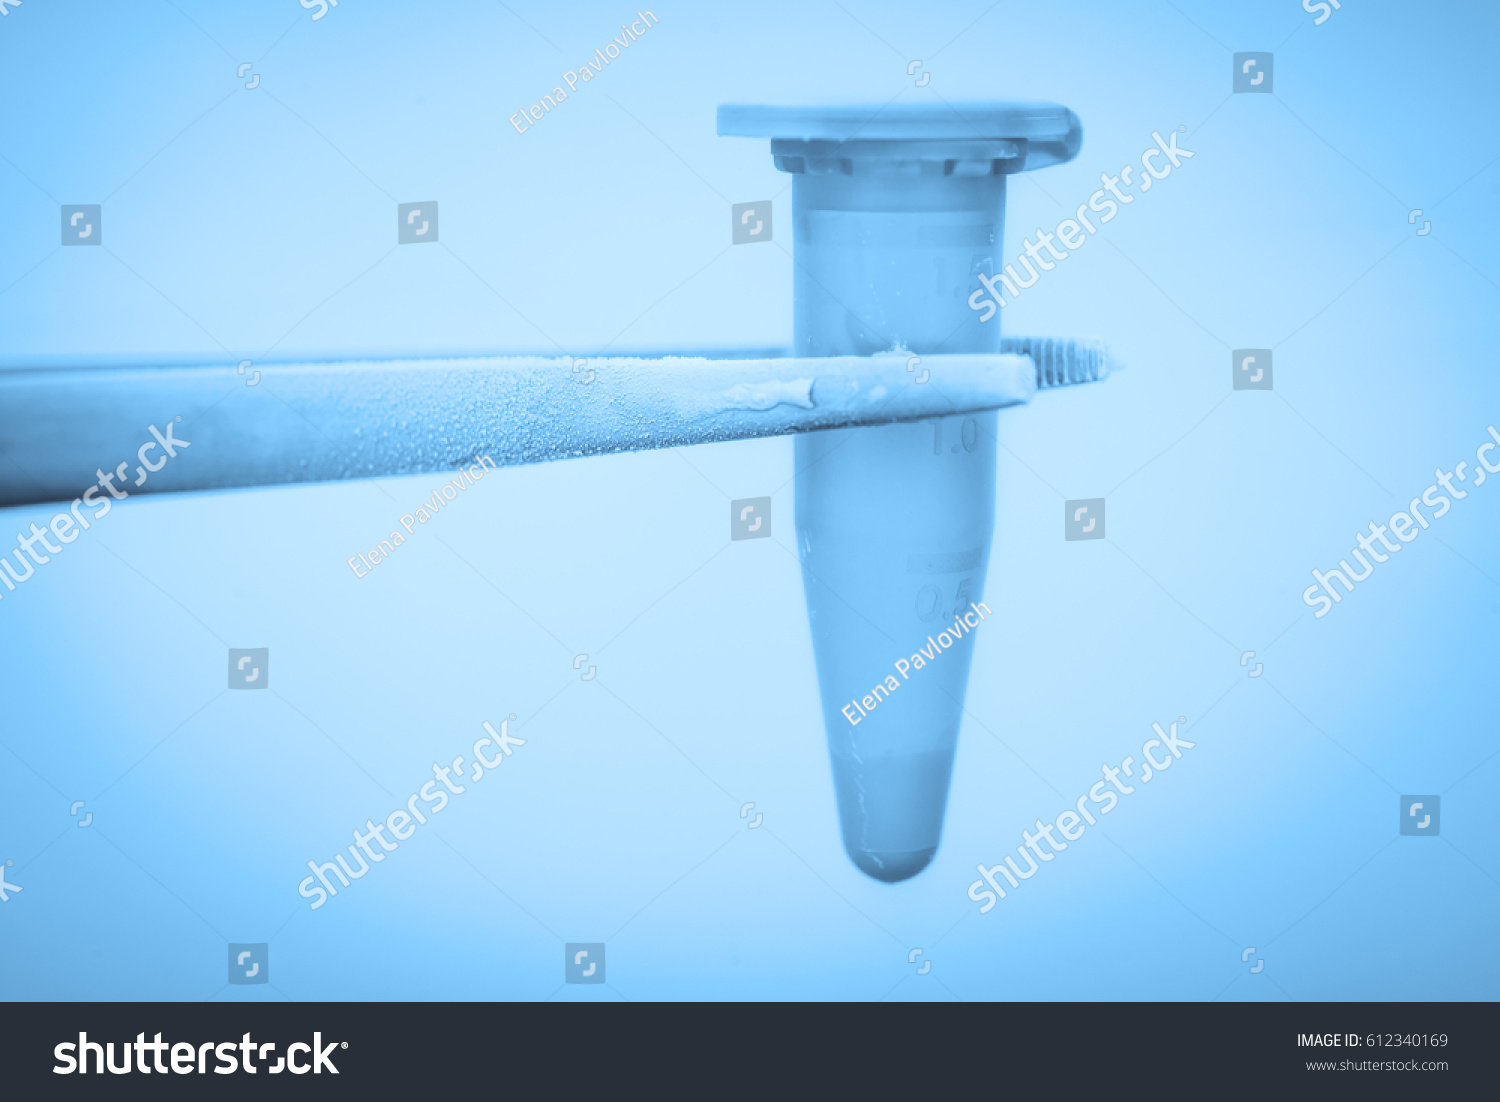  Test tube with sperm or eggs samples, cryopreservation in the liquid nitrogen  #612340169